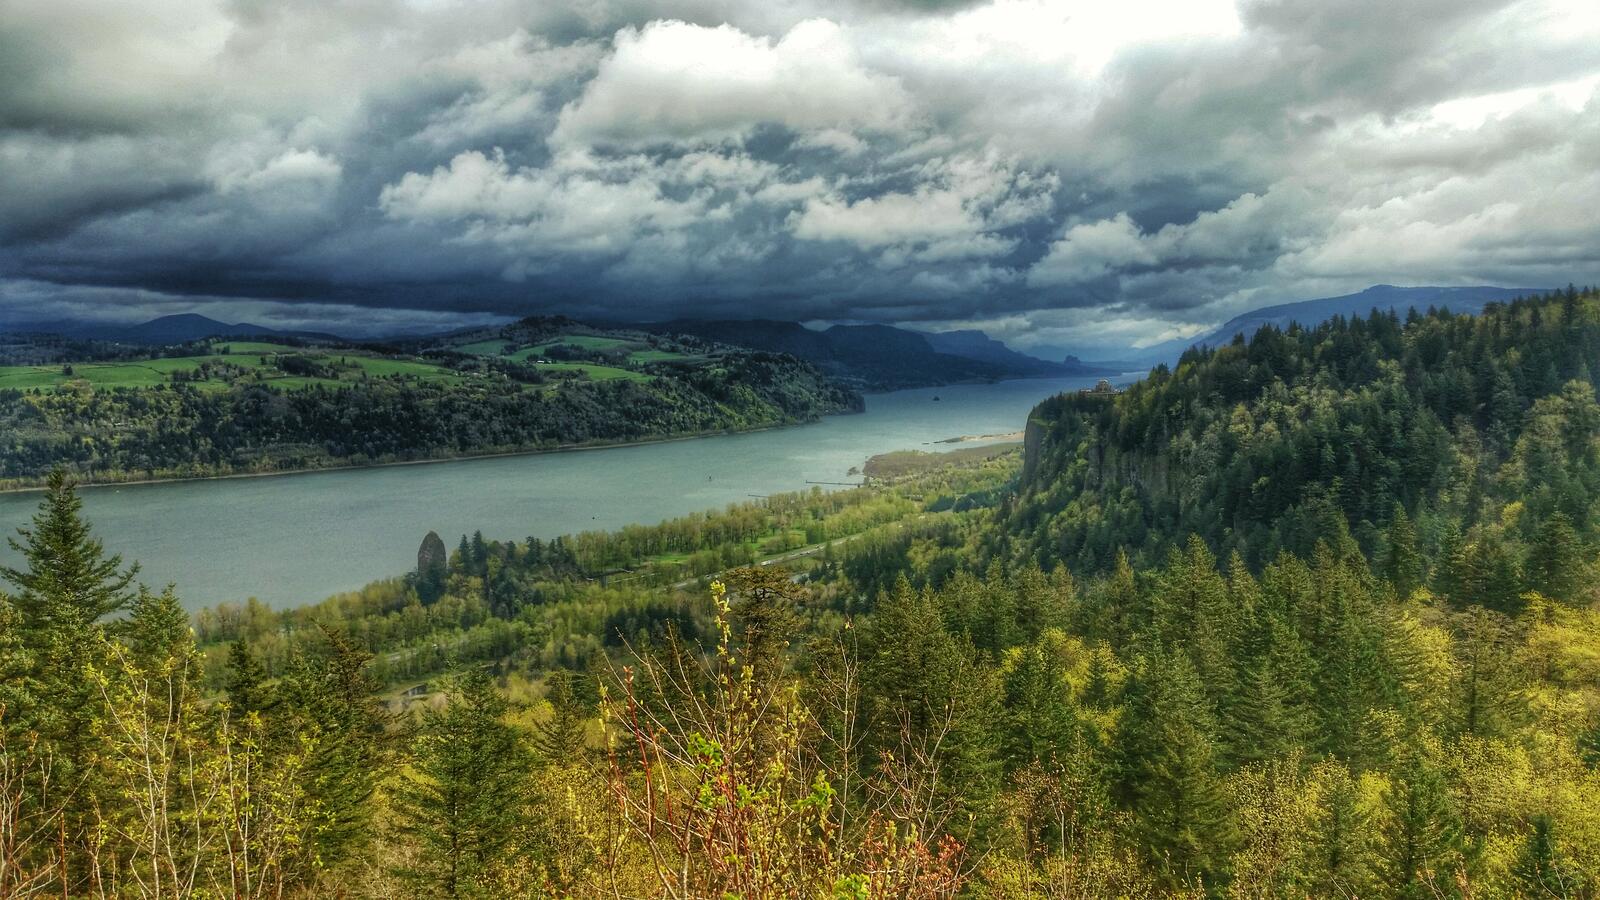 Wallpapers trees Columbia Gorge landscape on the desktop